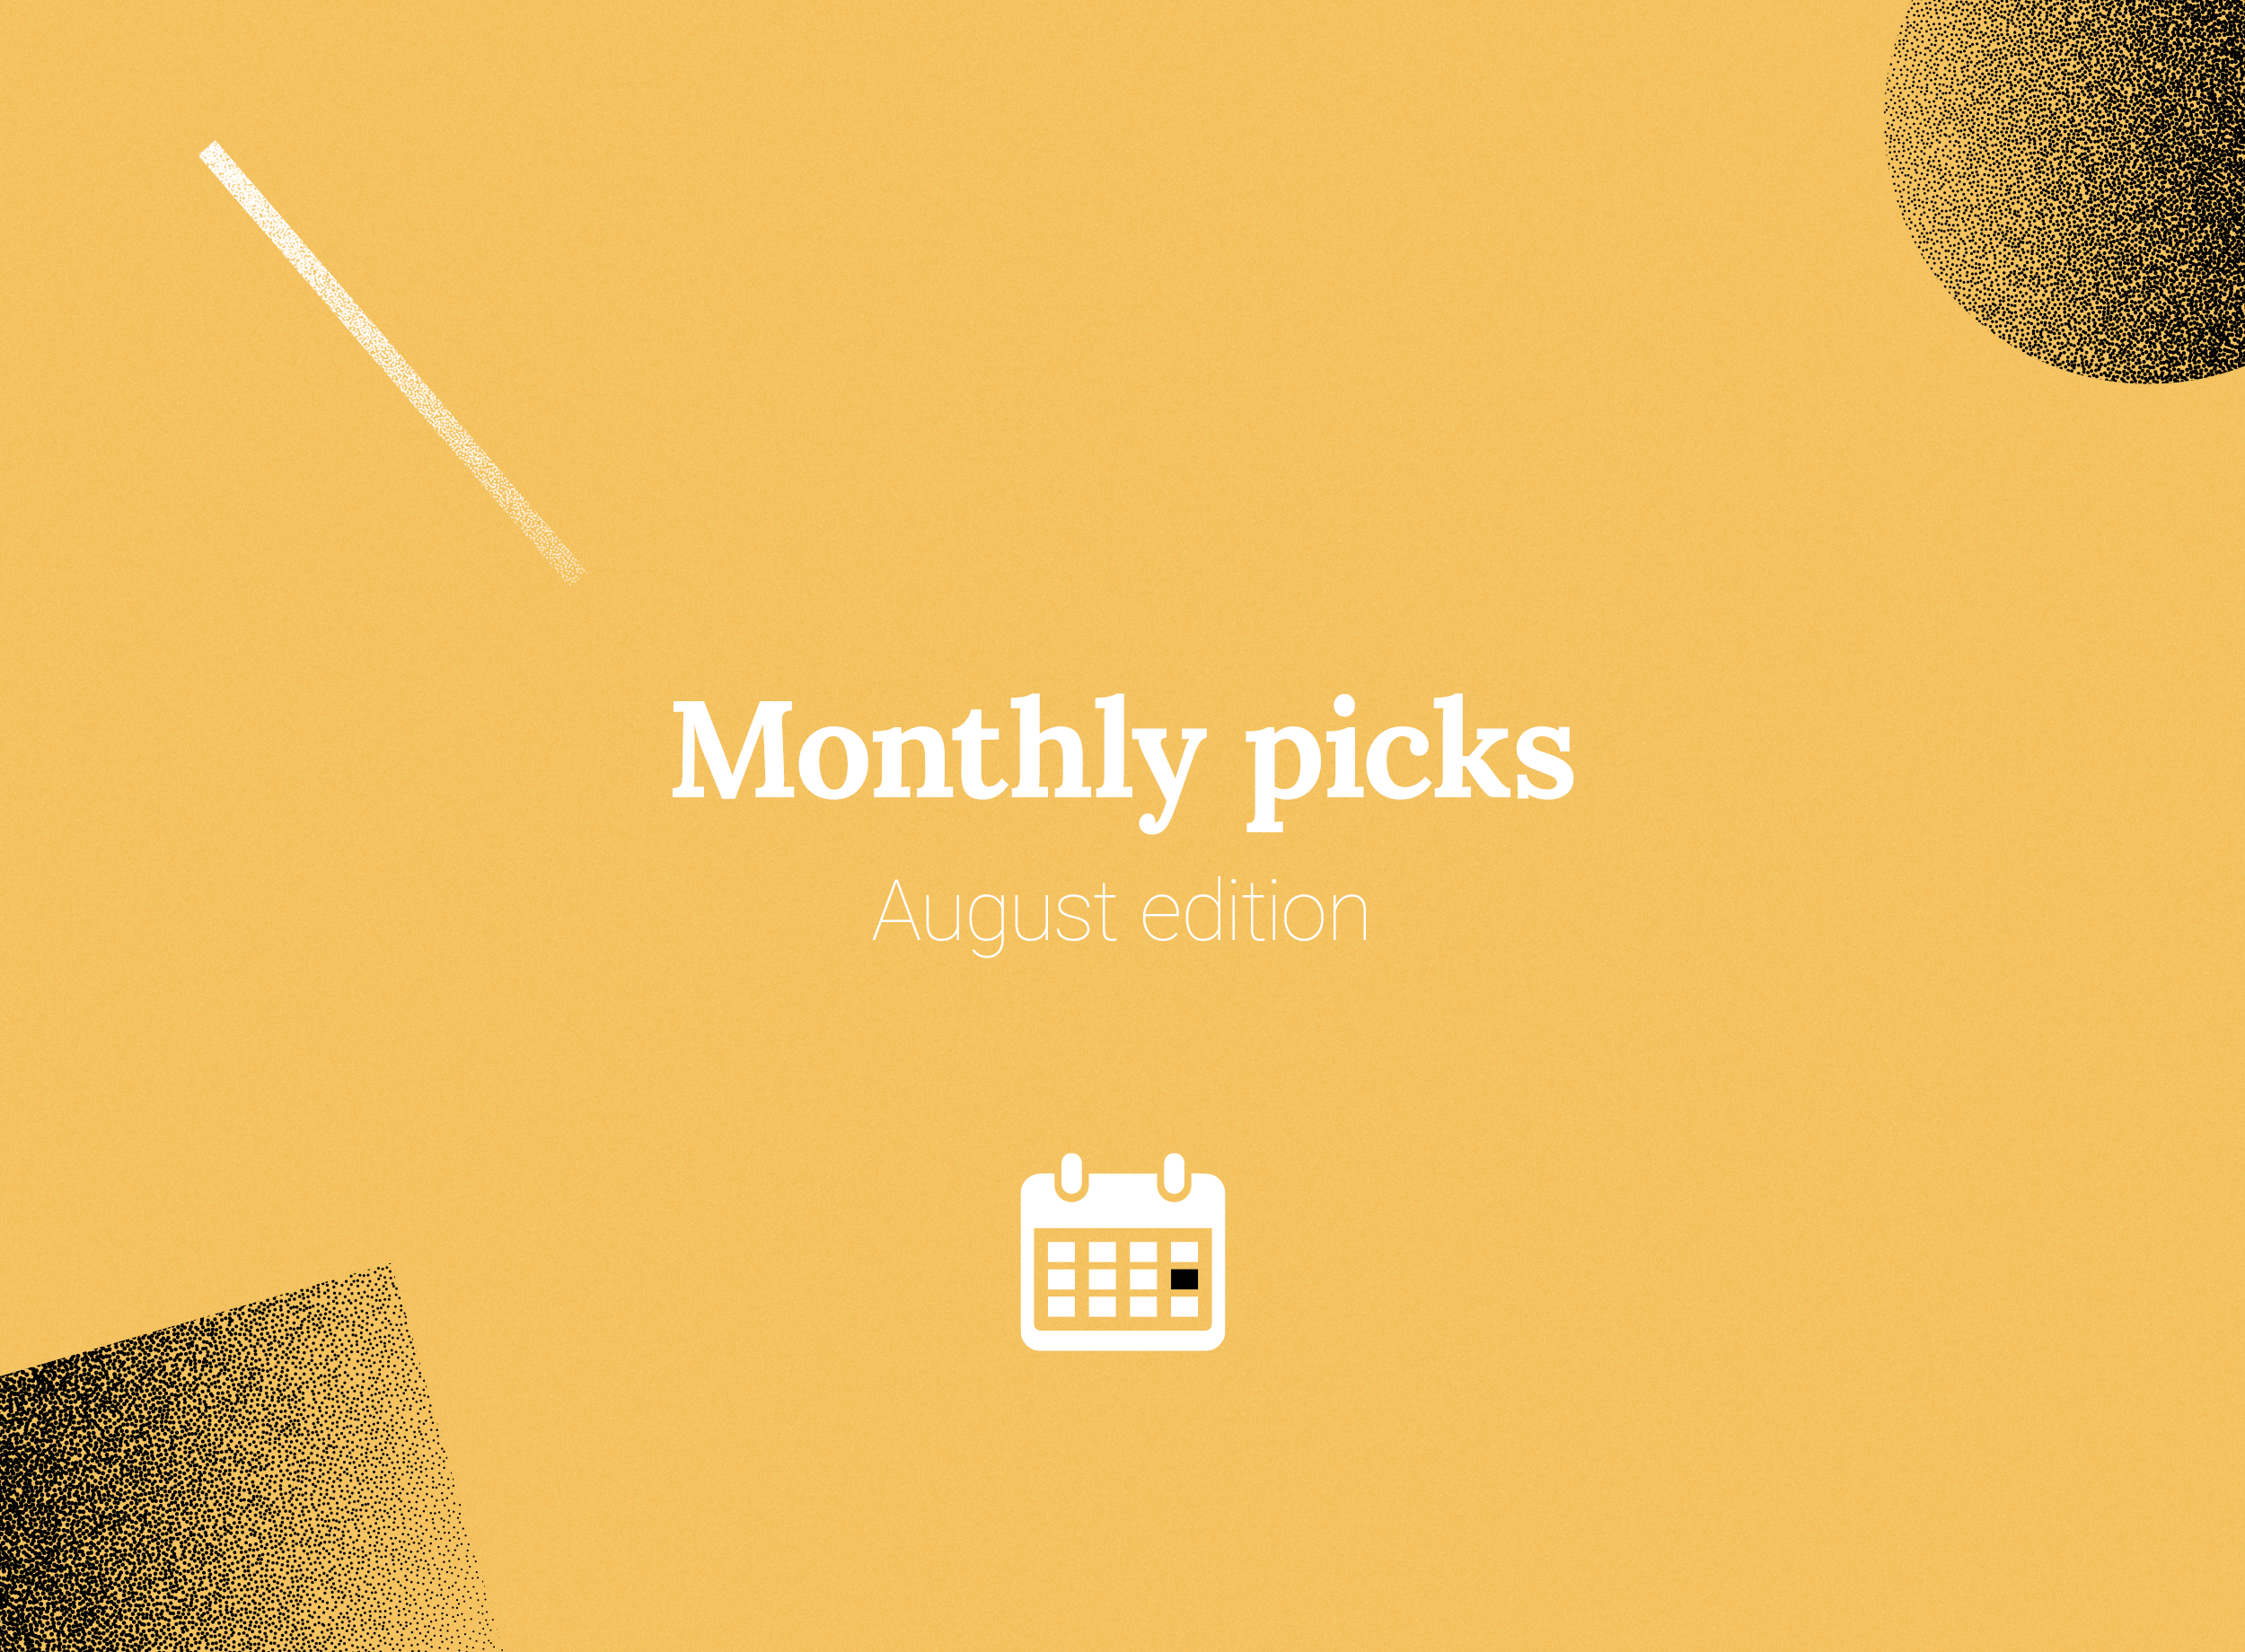 Monthly picks (August edition)